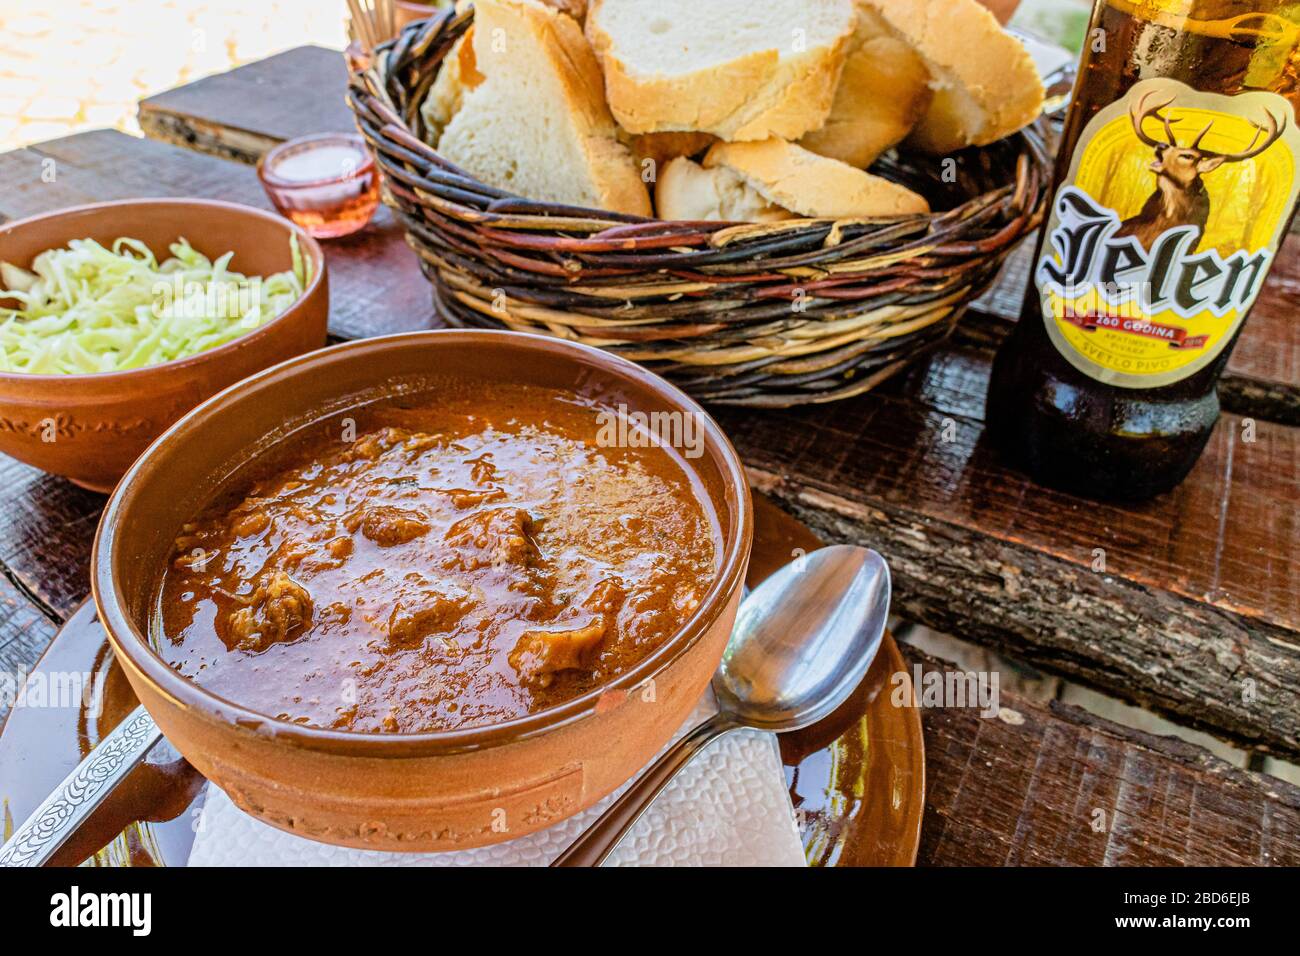 Traditional beef goulash served with bread, onions and a bottle of Jelen beer, from a cafe at Zasavica nature park, Serbia. May 2017. Stock Photo